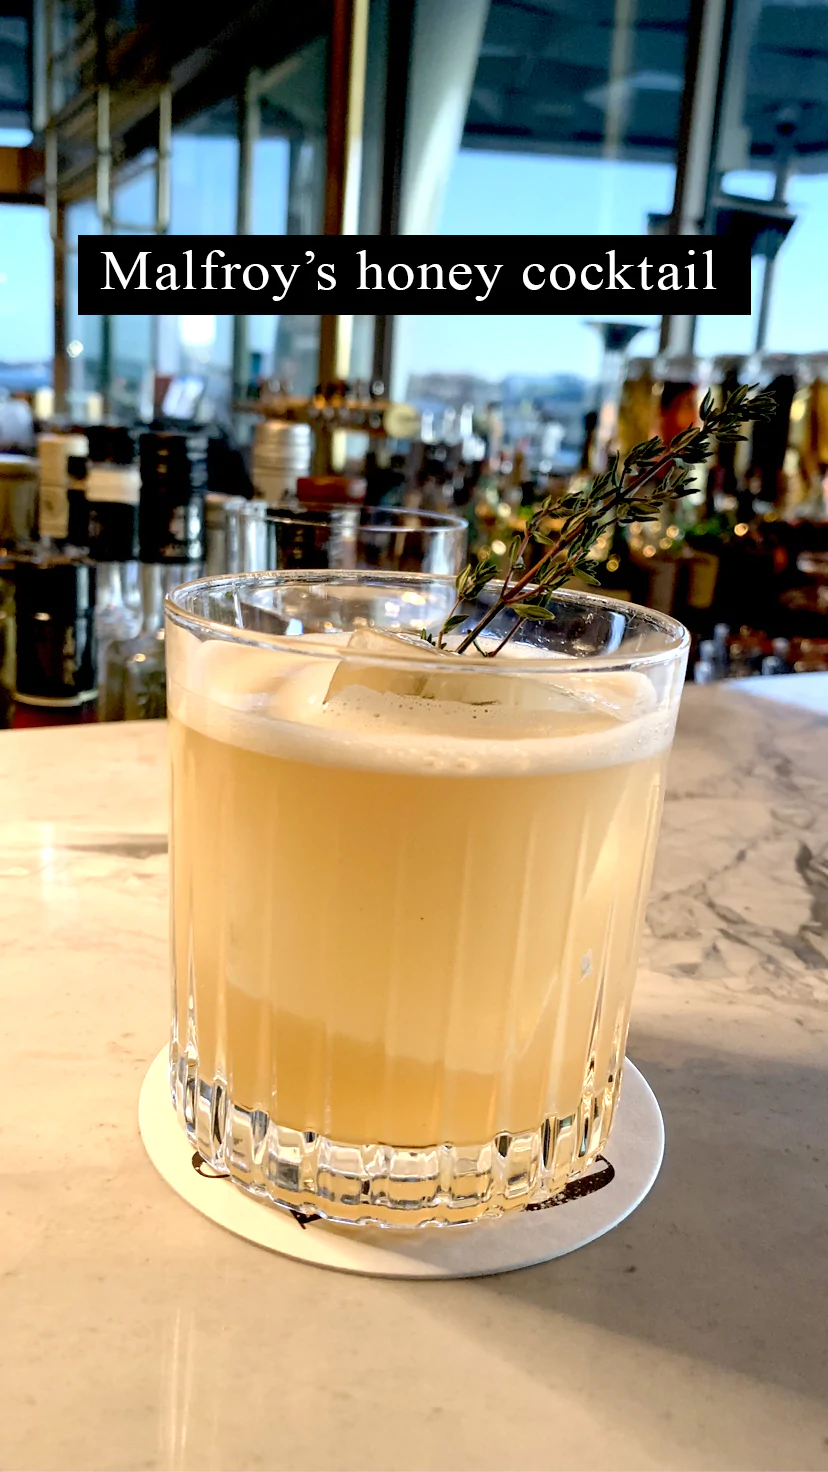 Malfroy's Gold at Woodcut - Honey cocktail